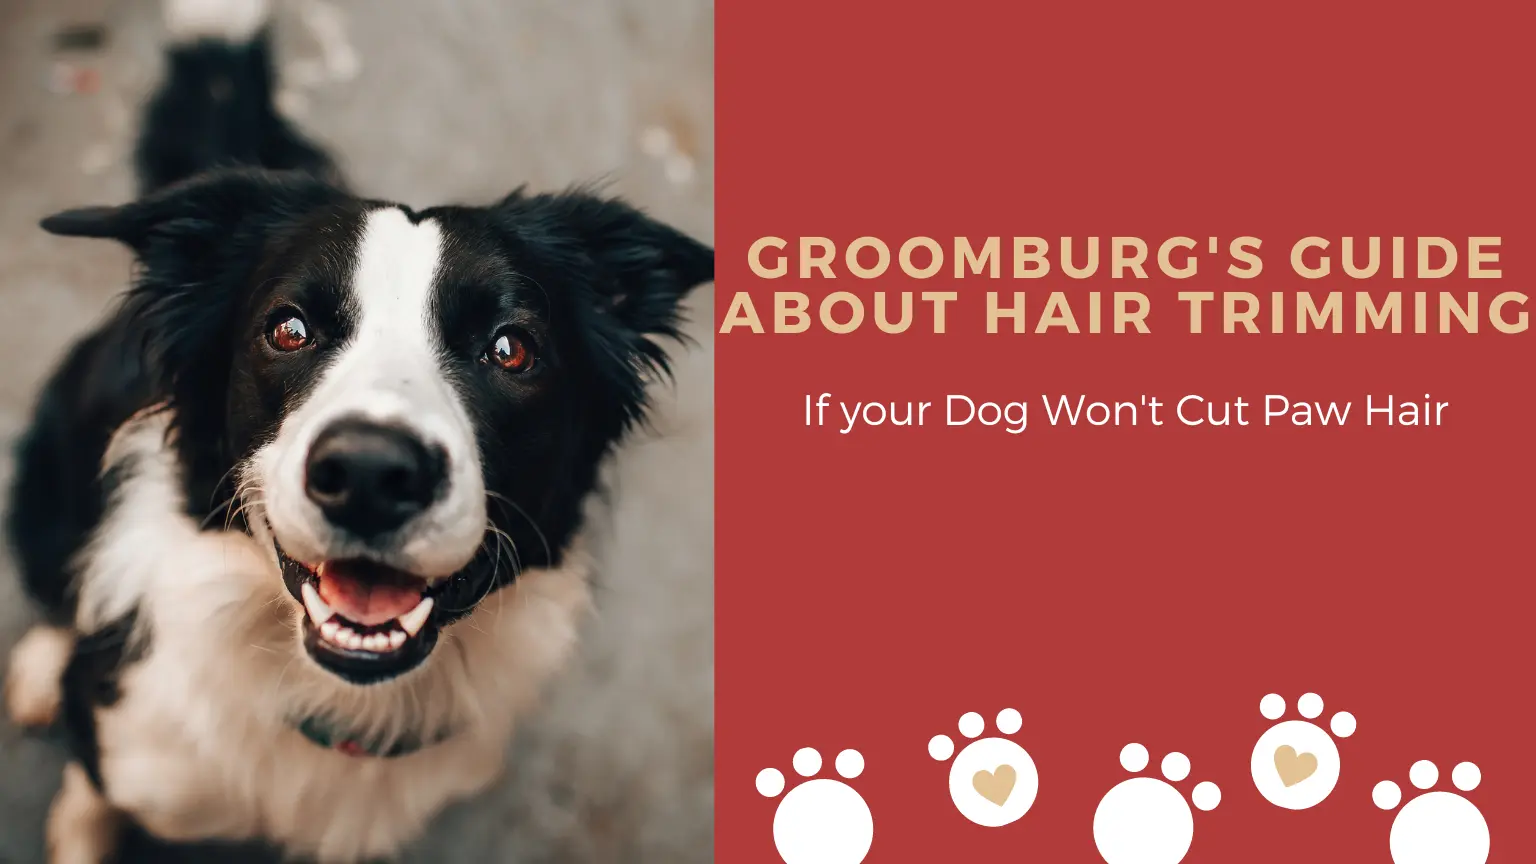 Trimming Hair Around the Paw Pads – Groomburg’s Guide If your Dog Won’t Cut Paw Hair